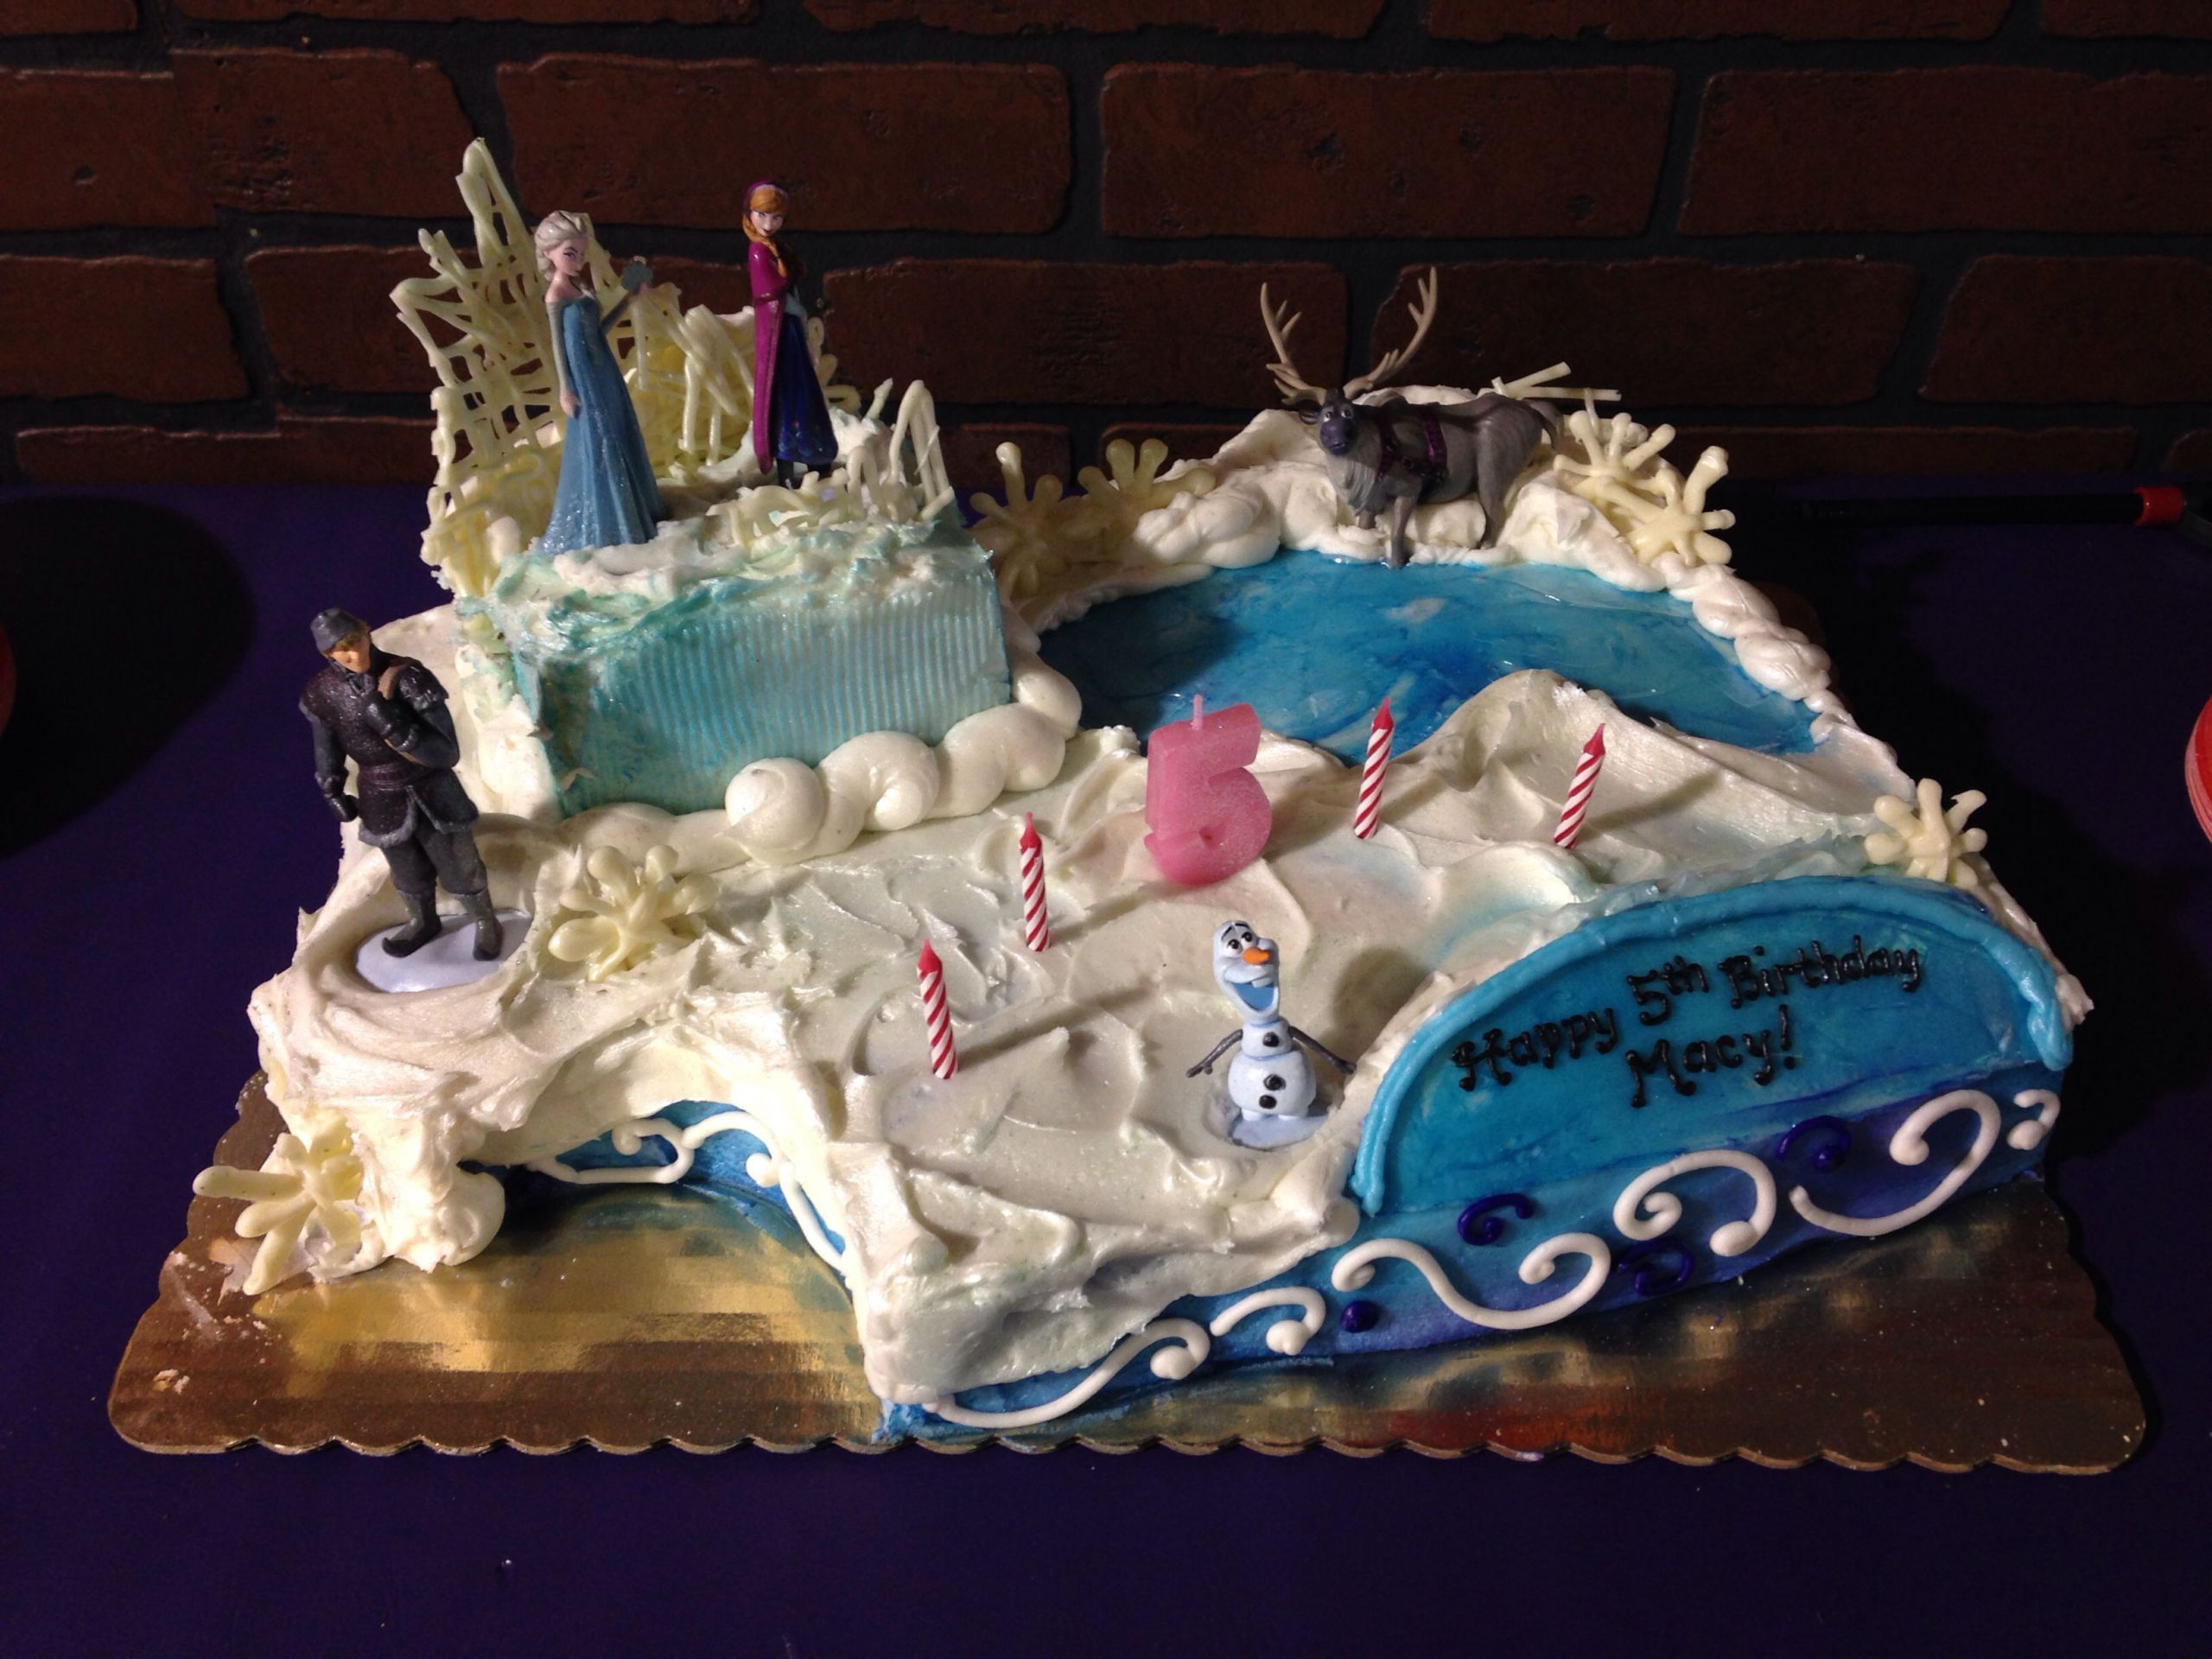 Harris Teeter Birthday Cakes
 Frozen birthday cake Characters came from the Disney